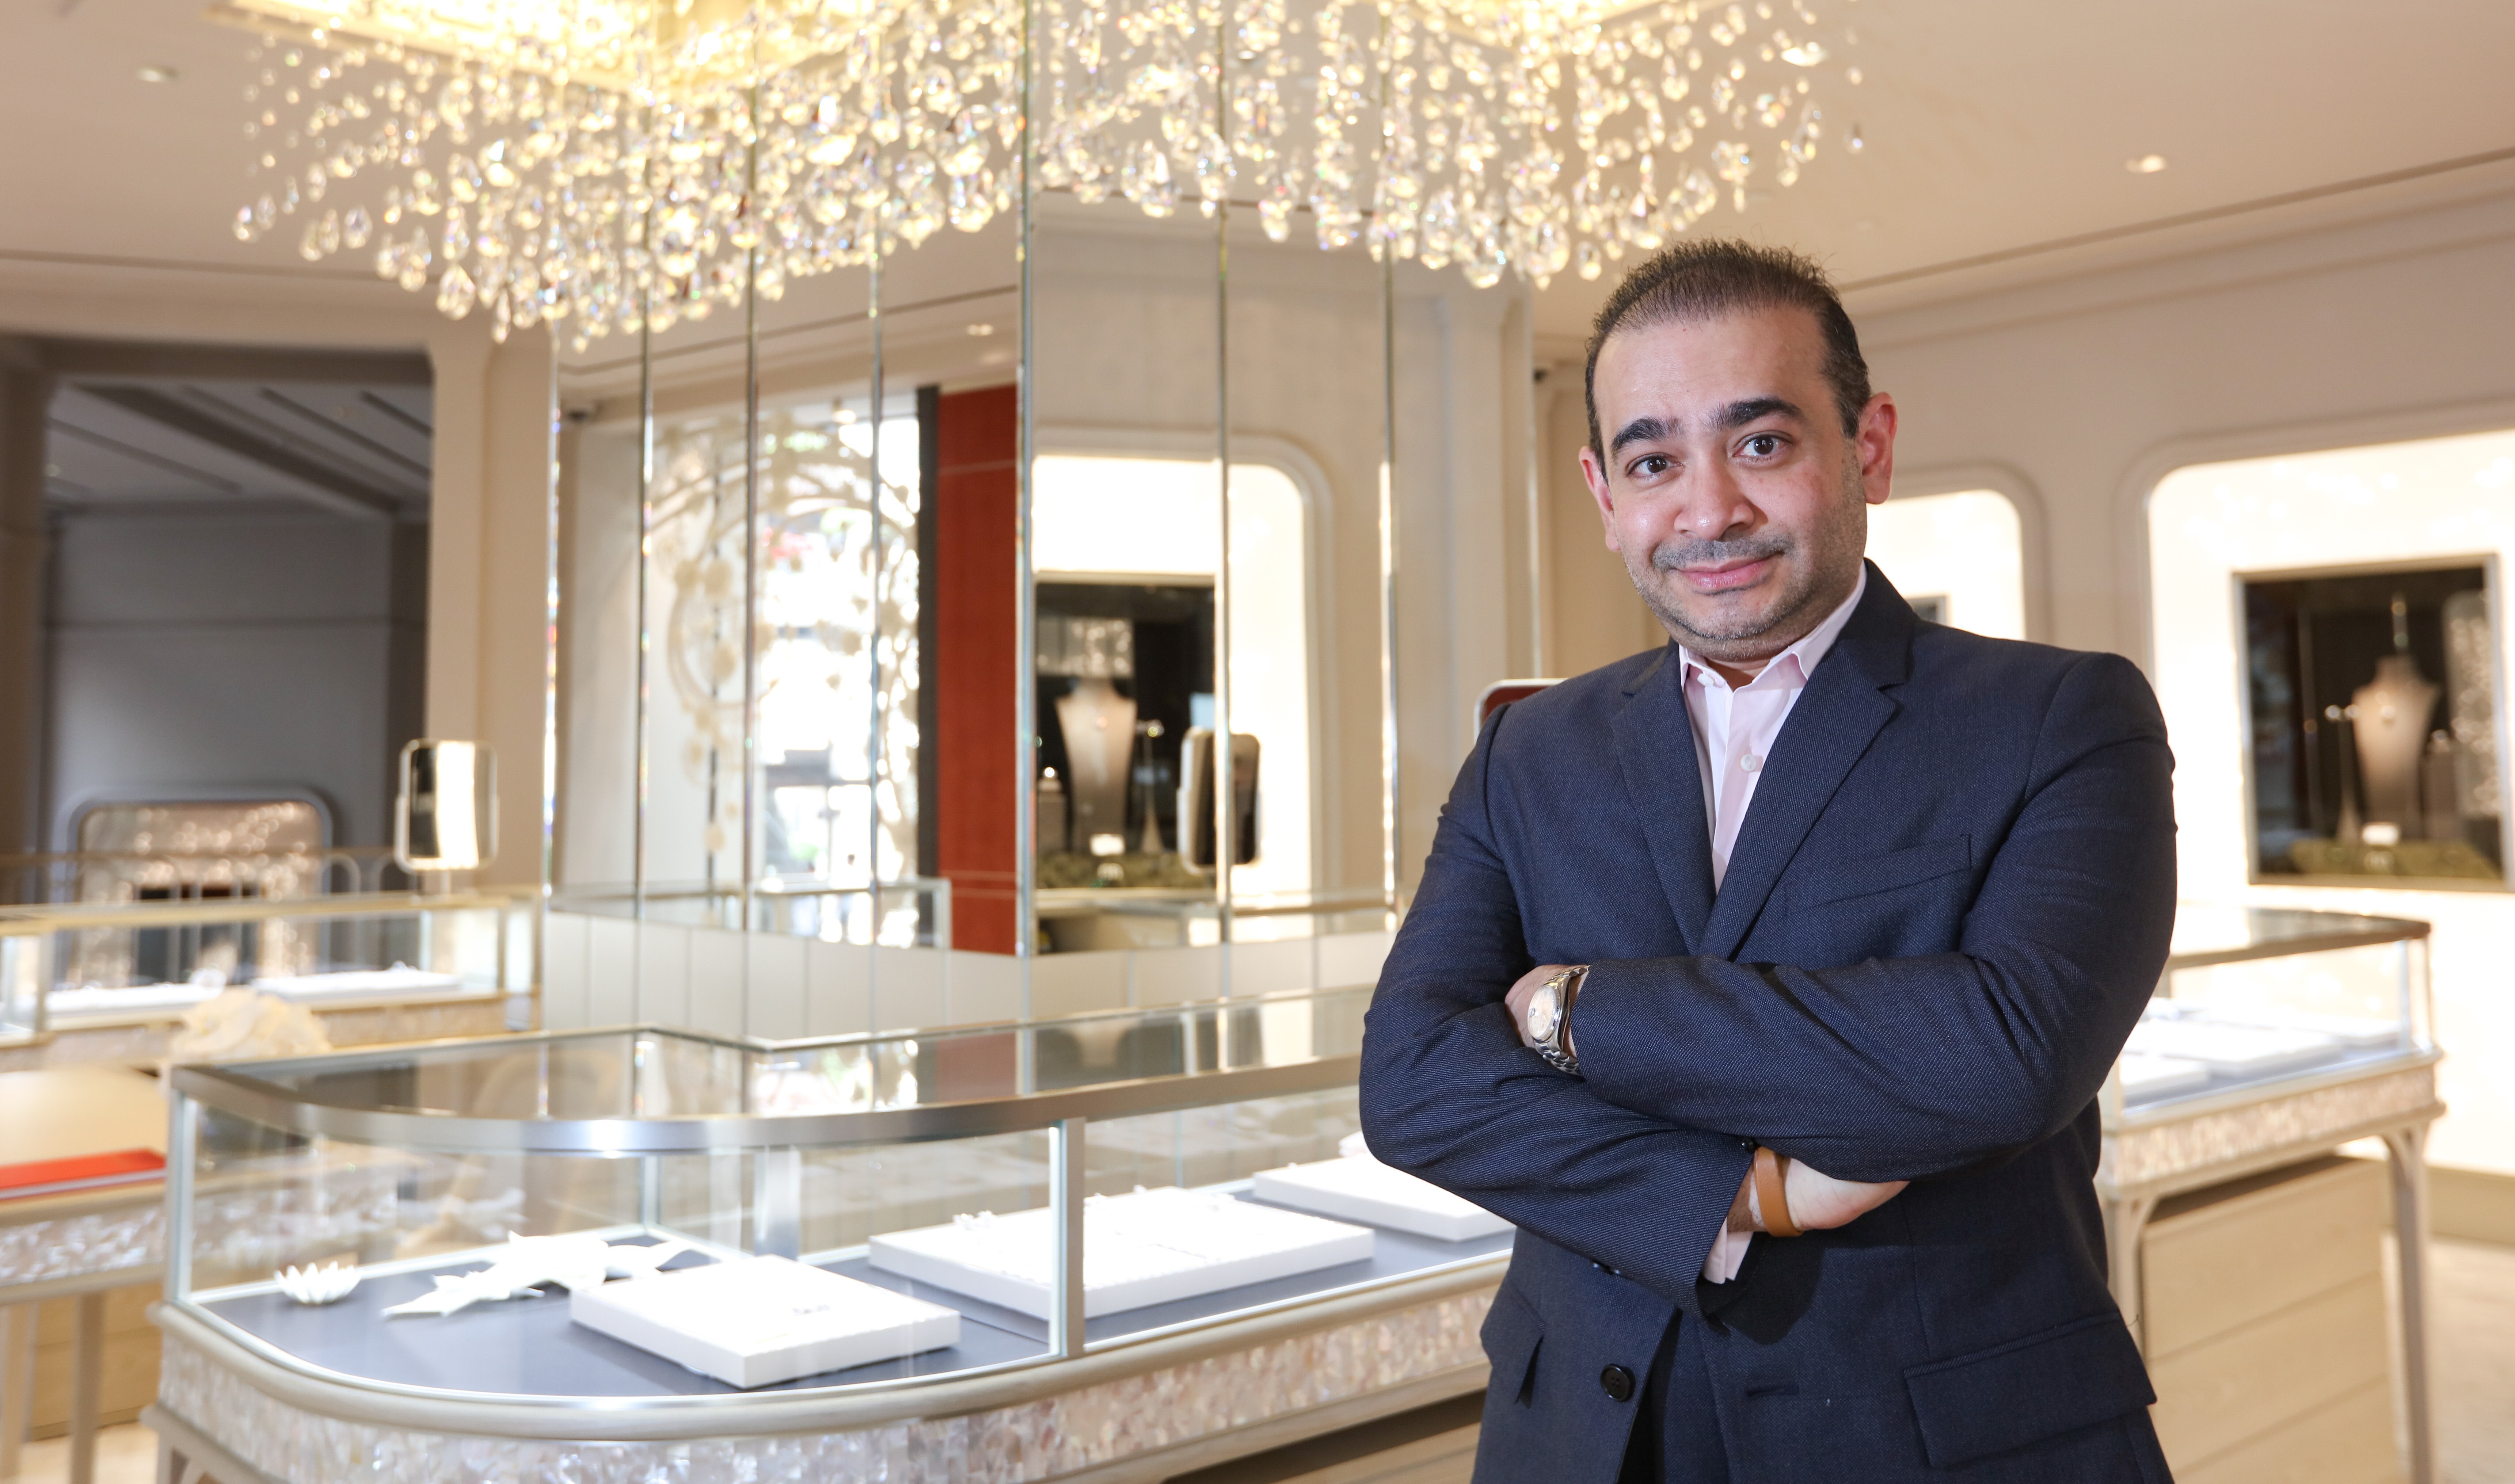 Nirav Modi’s empire came crashing down as allegations emerged of him fraudulently securing guarantees from India’s state-run lender. Photo: SCMP/Felix Wong